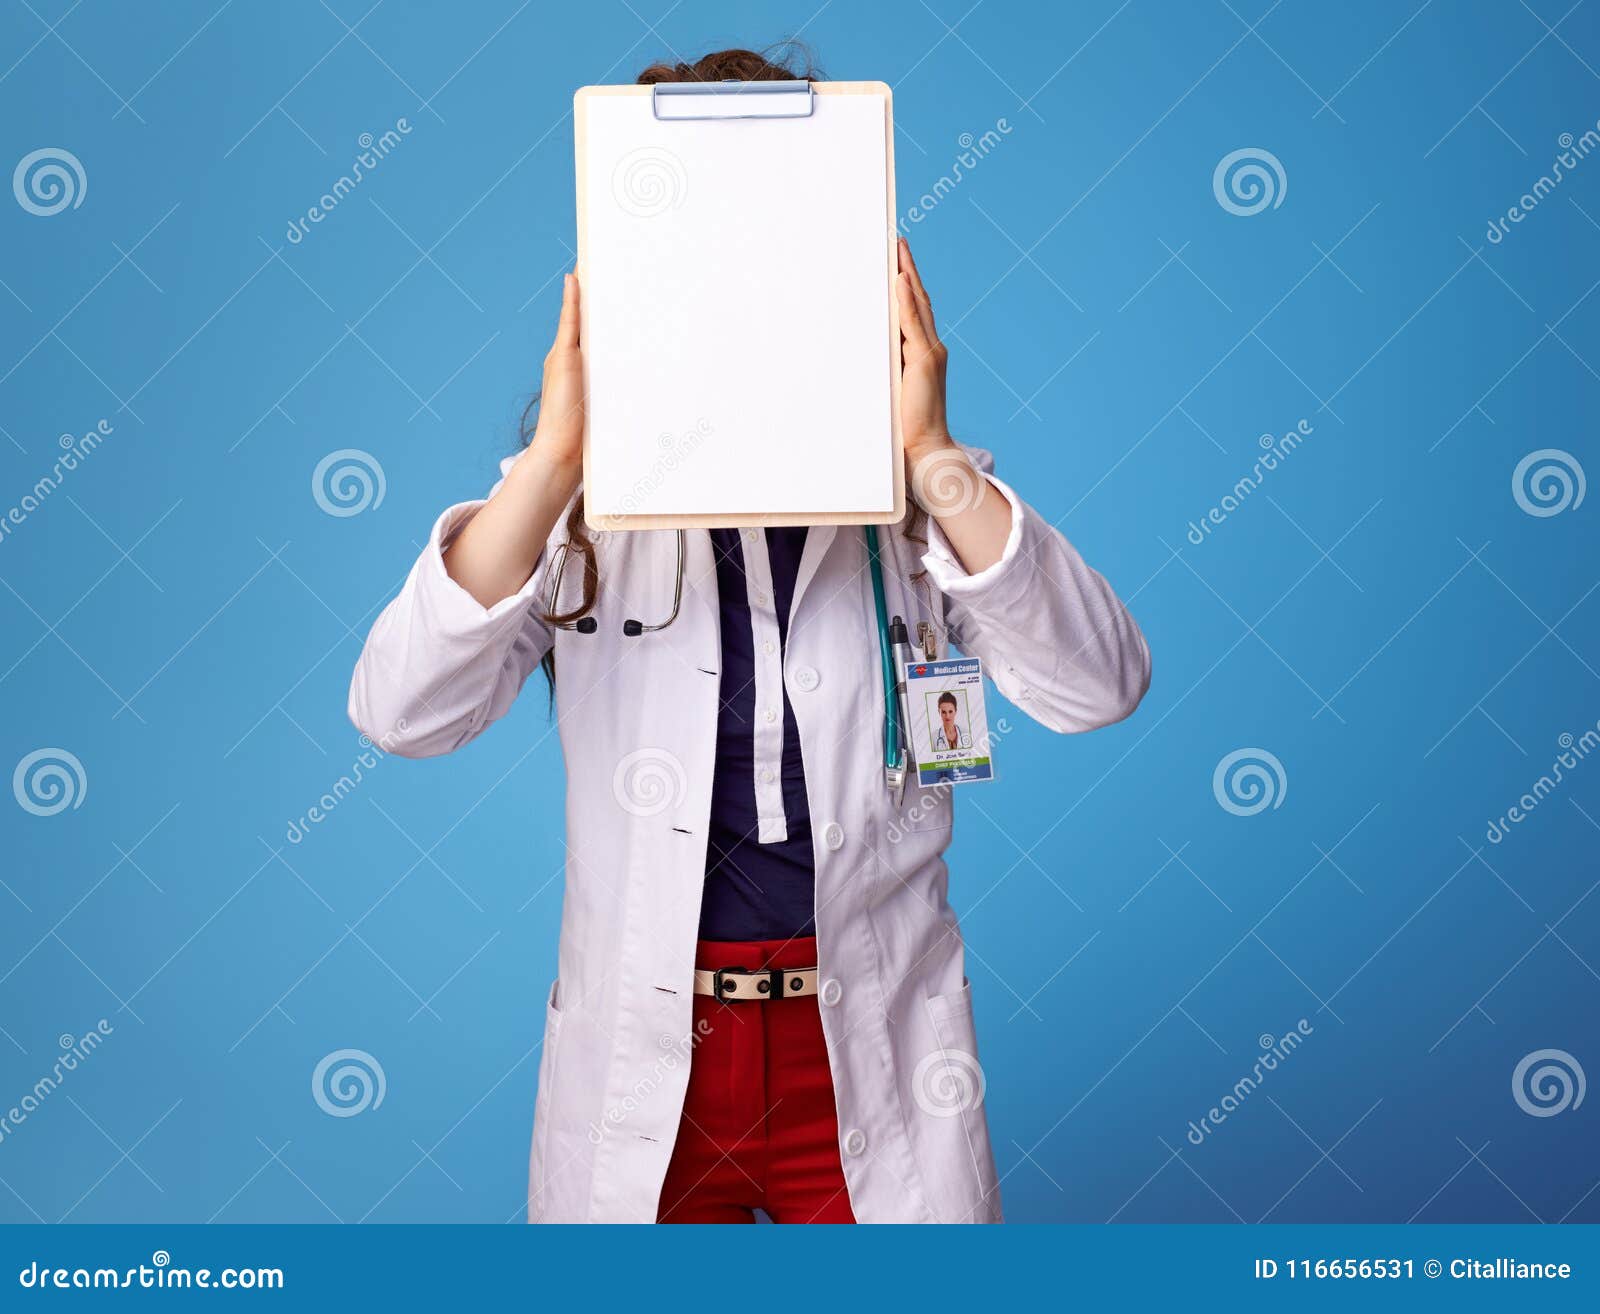 doctor woman hoding clipboards front of face on blue